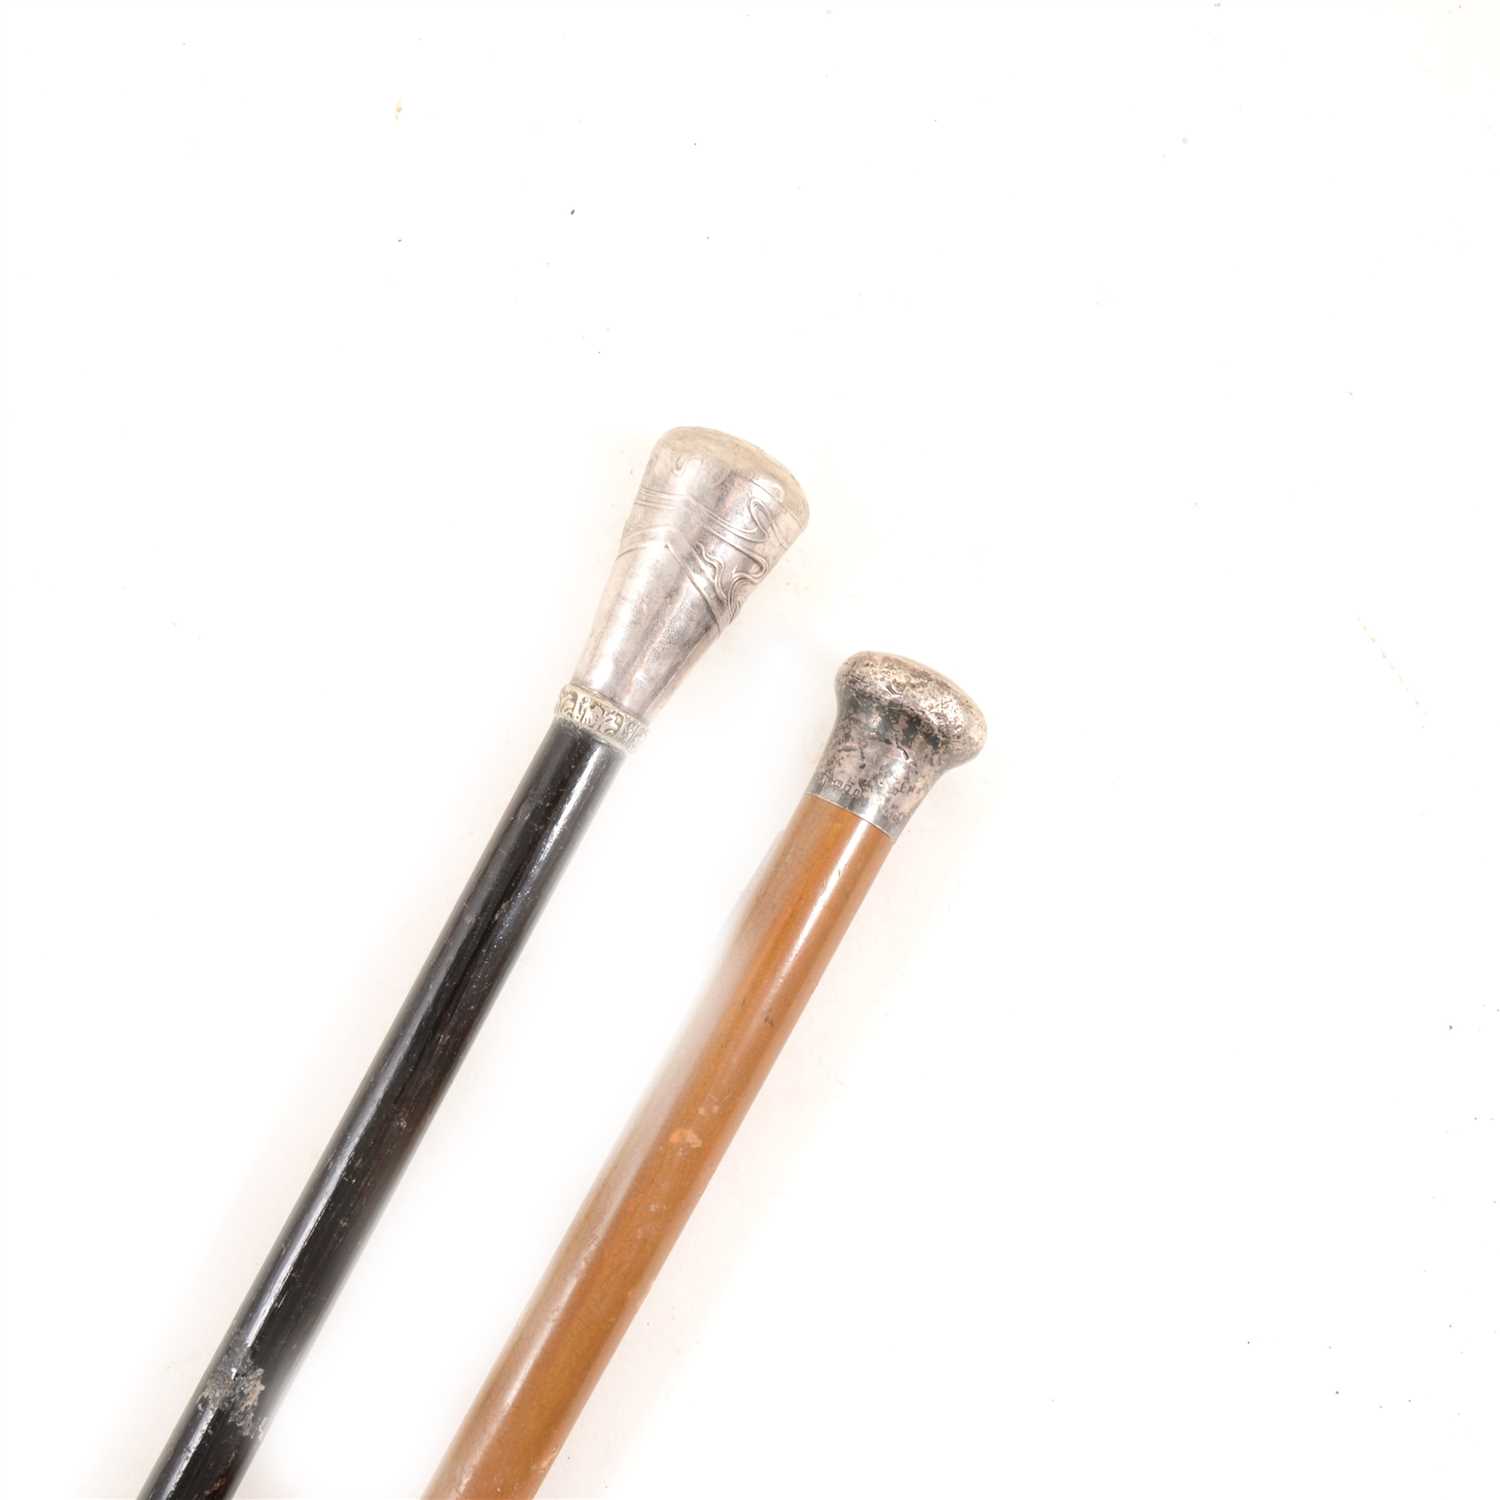 Lot 135 - Two walking canes, one with a hallmarked silver pommel, London 1924, the other with an Art Nouveau-style metal pommel.